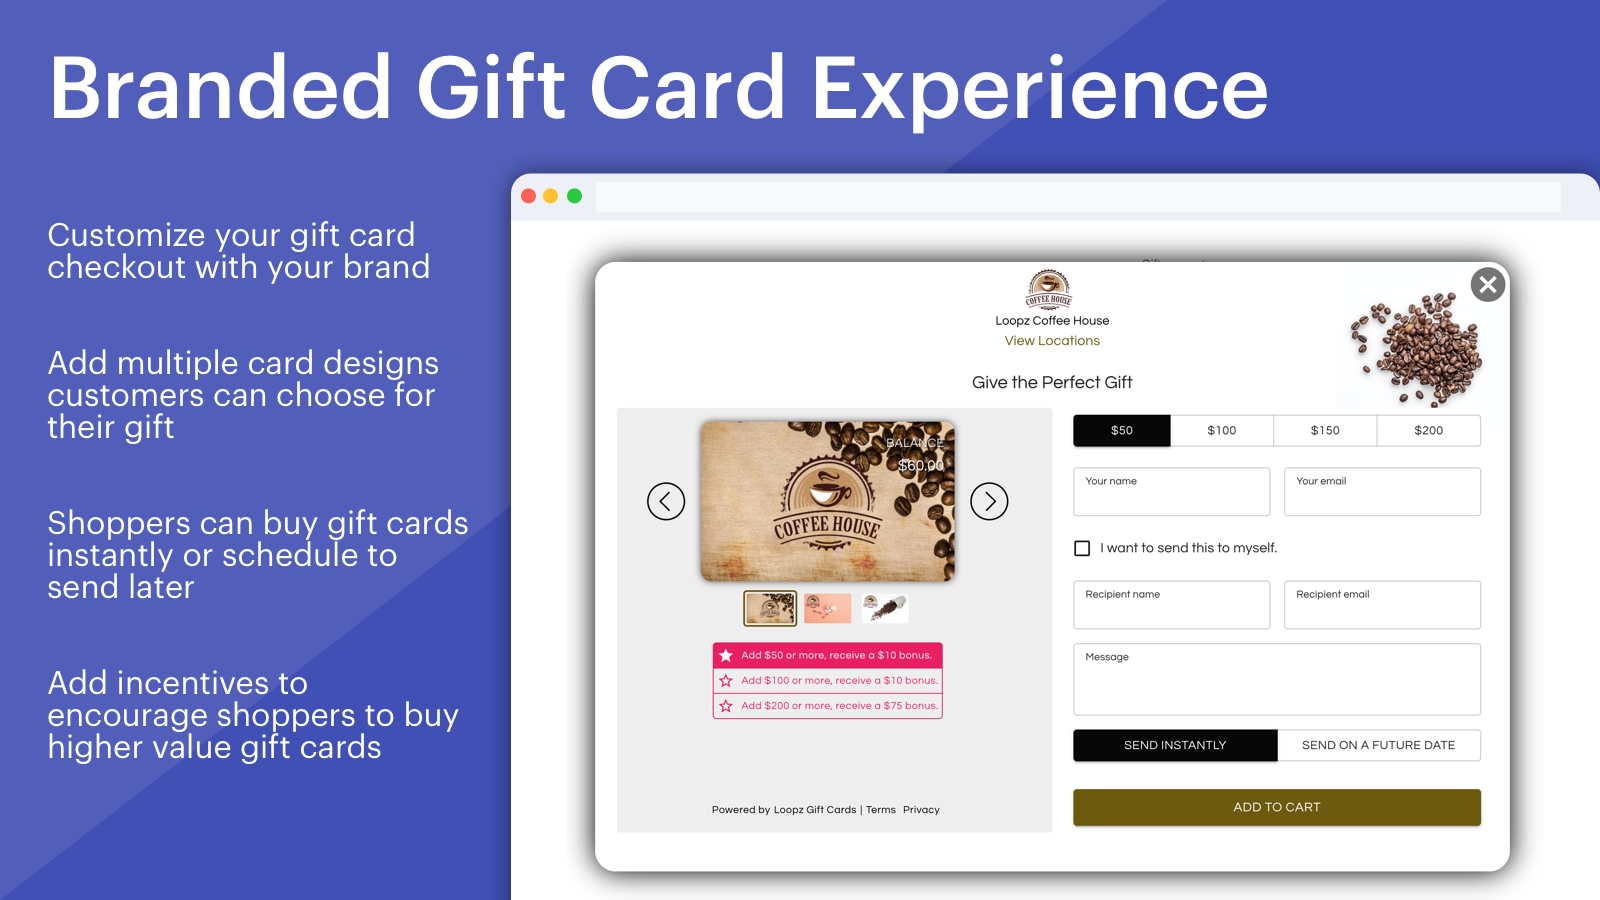 Branded gift card experience on your Shopify store